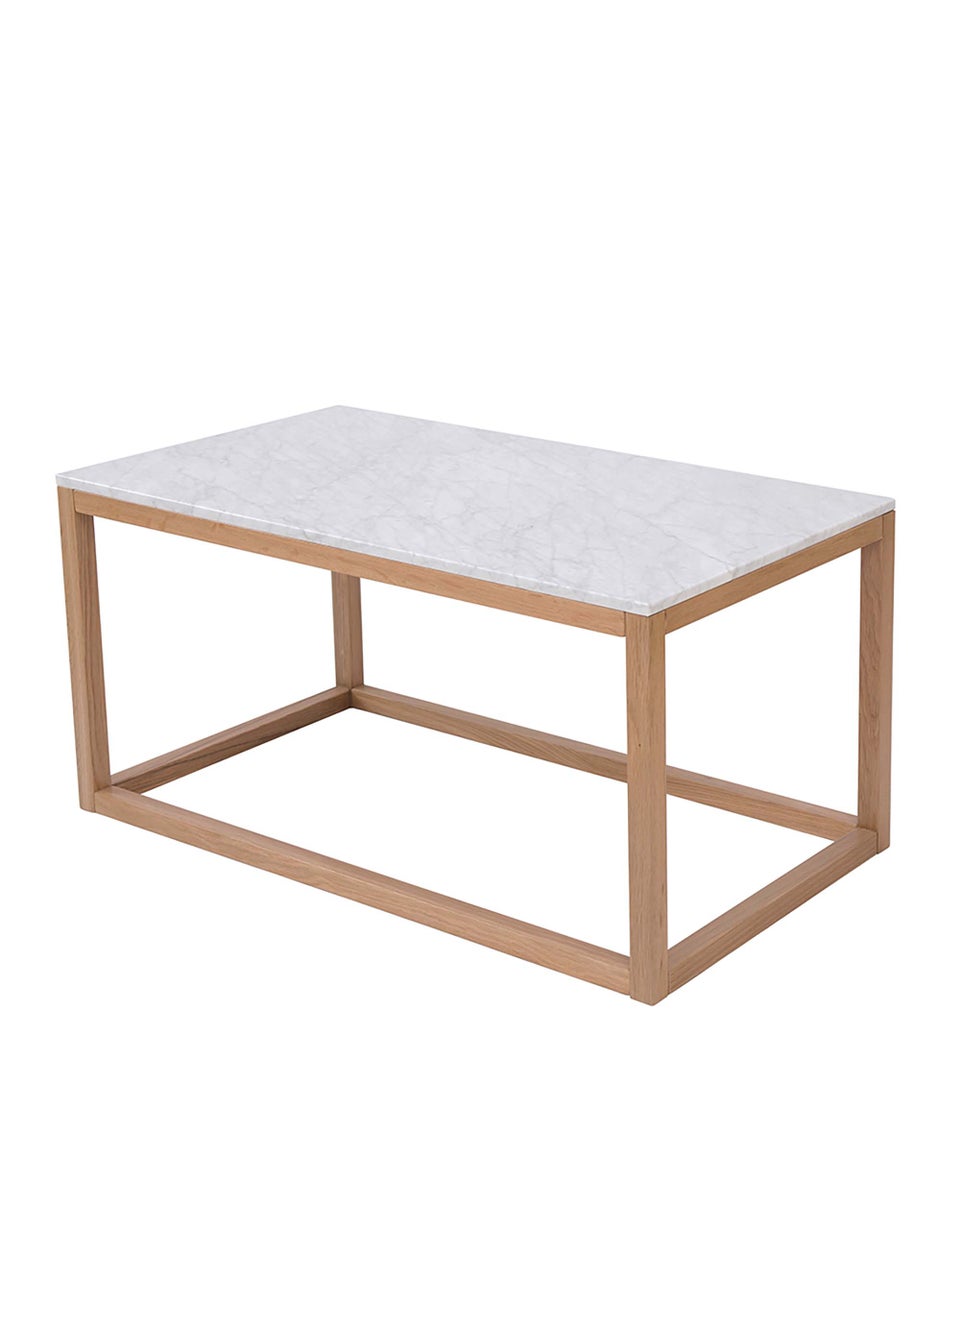 LPD Furniture Harlow Coffee Table Oak-White Marble Top (750x500x900mm)